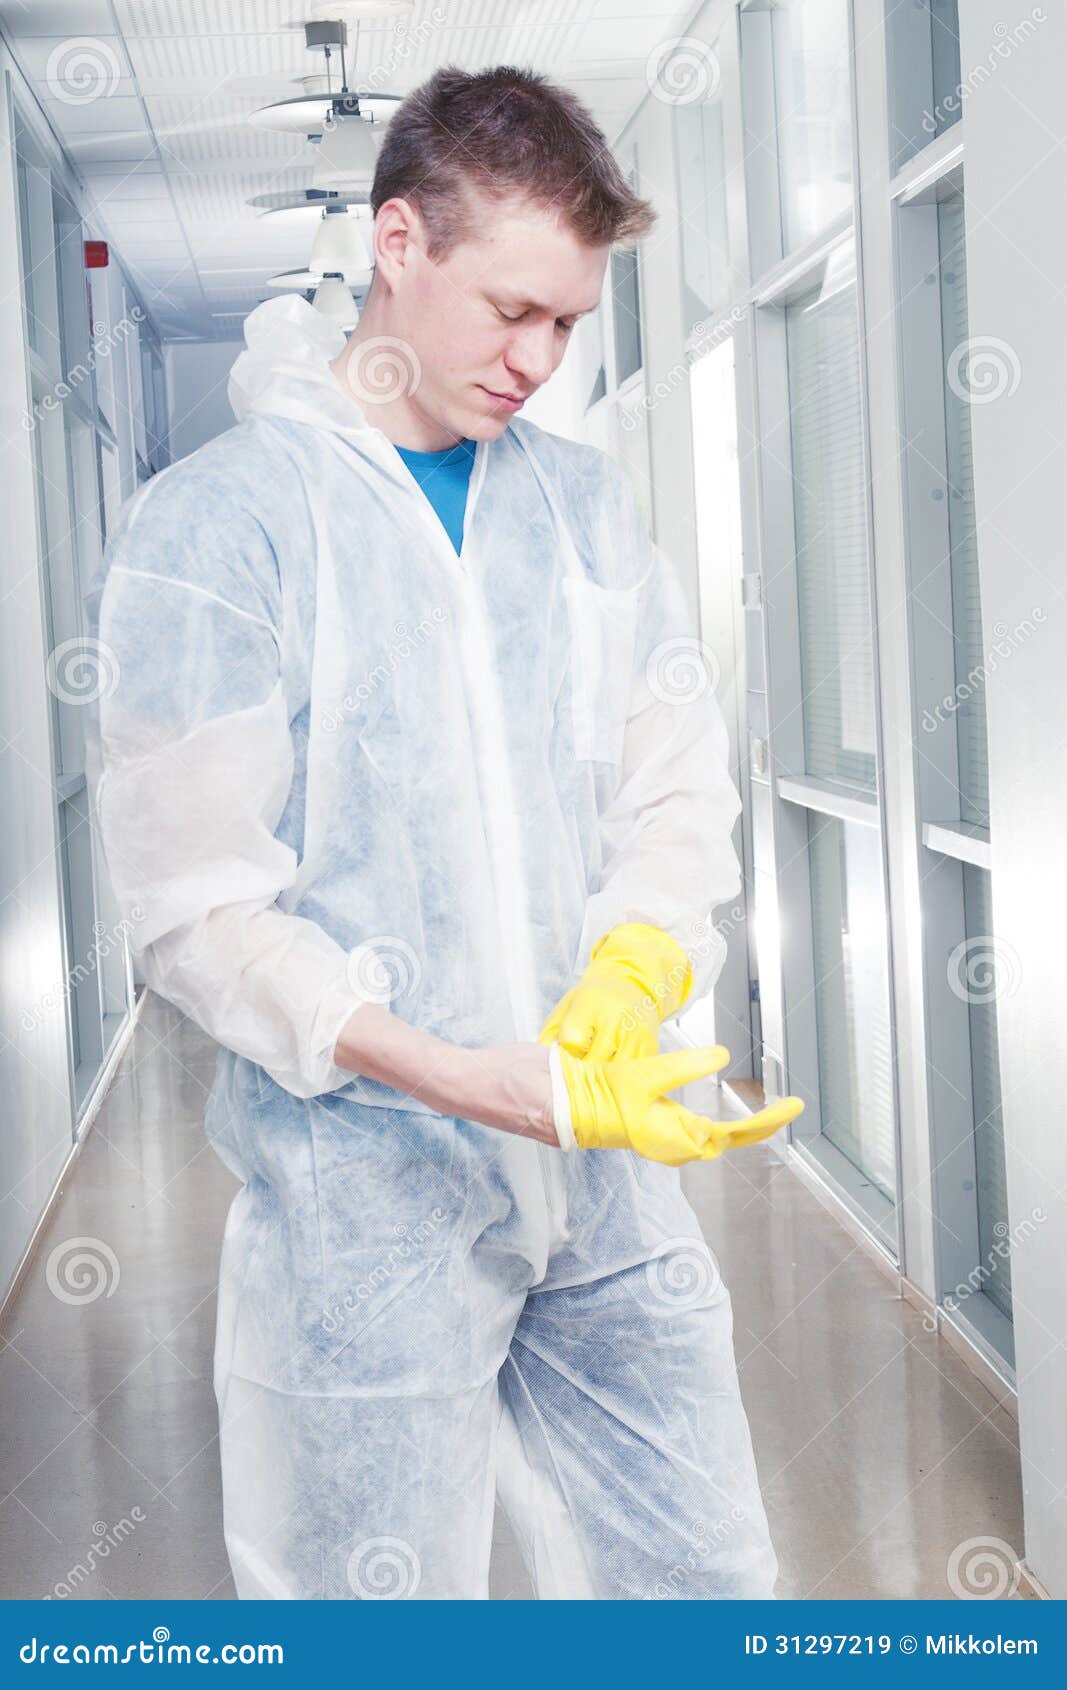 Office Cleaner Man Putting Rubber Glowes Stock Image - Image of room ...